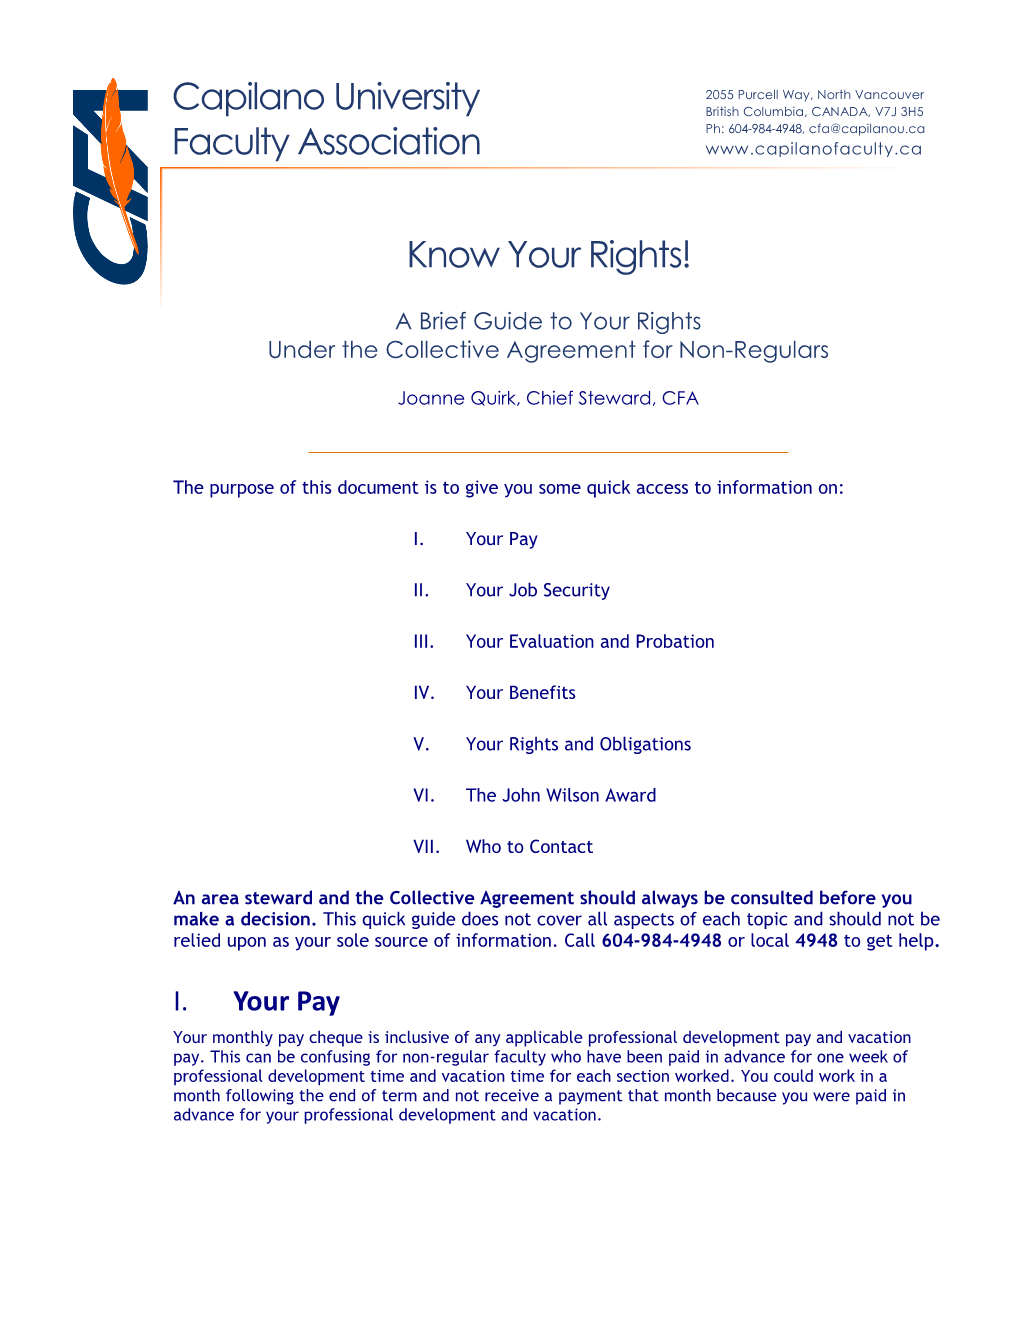 Capilano University Faculty Association Know Your Rights!